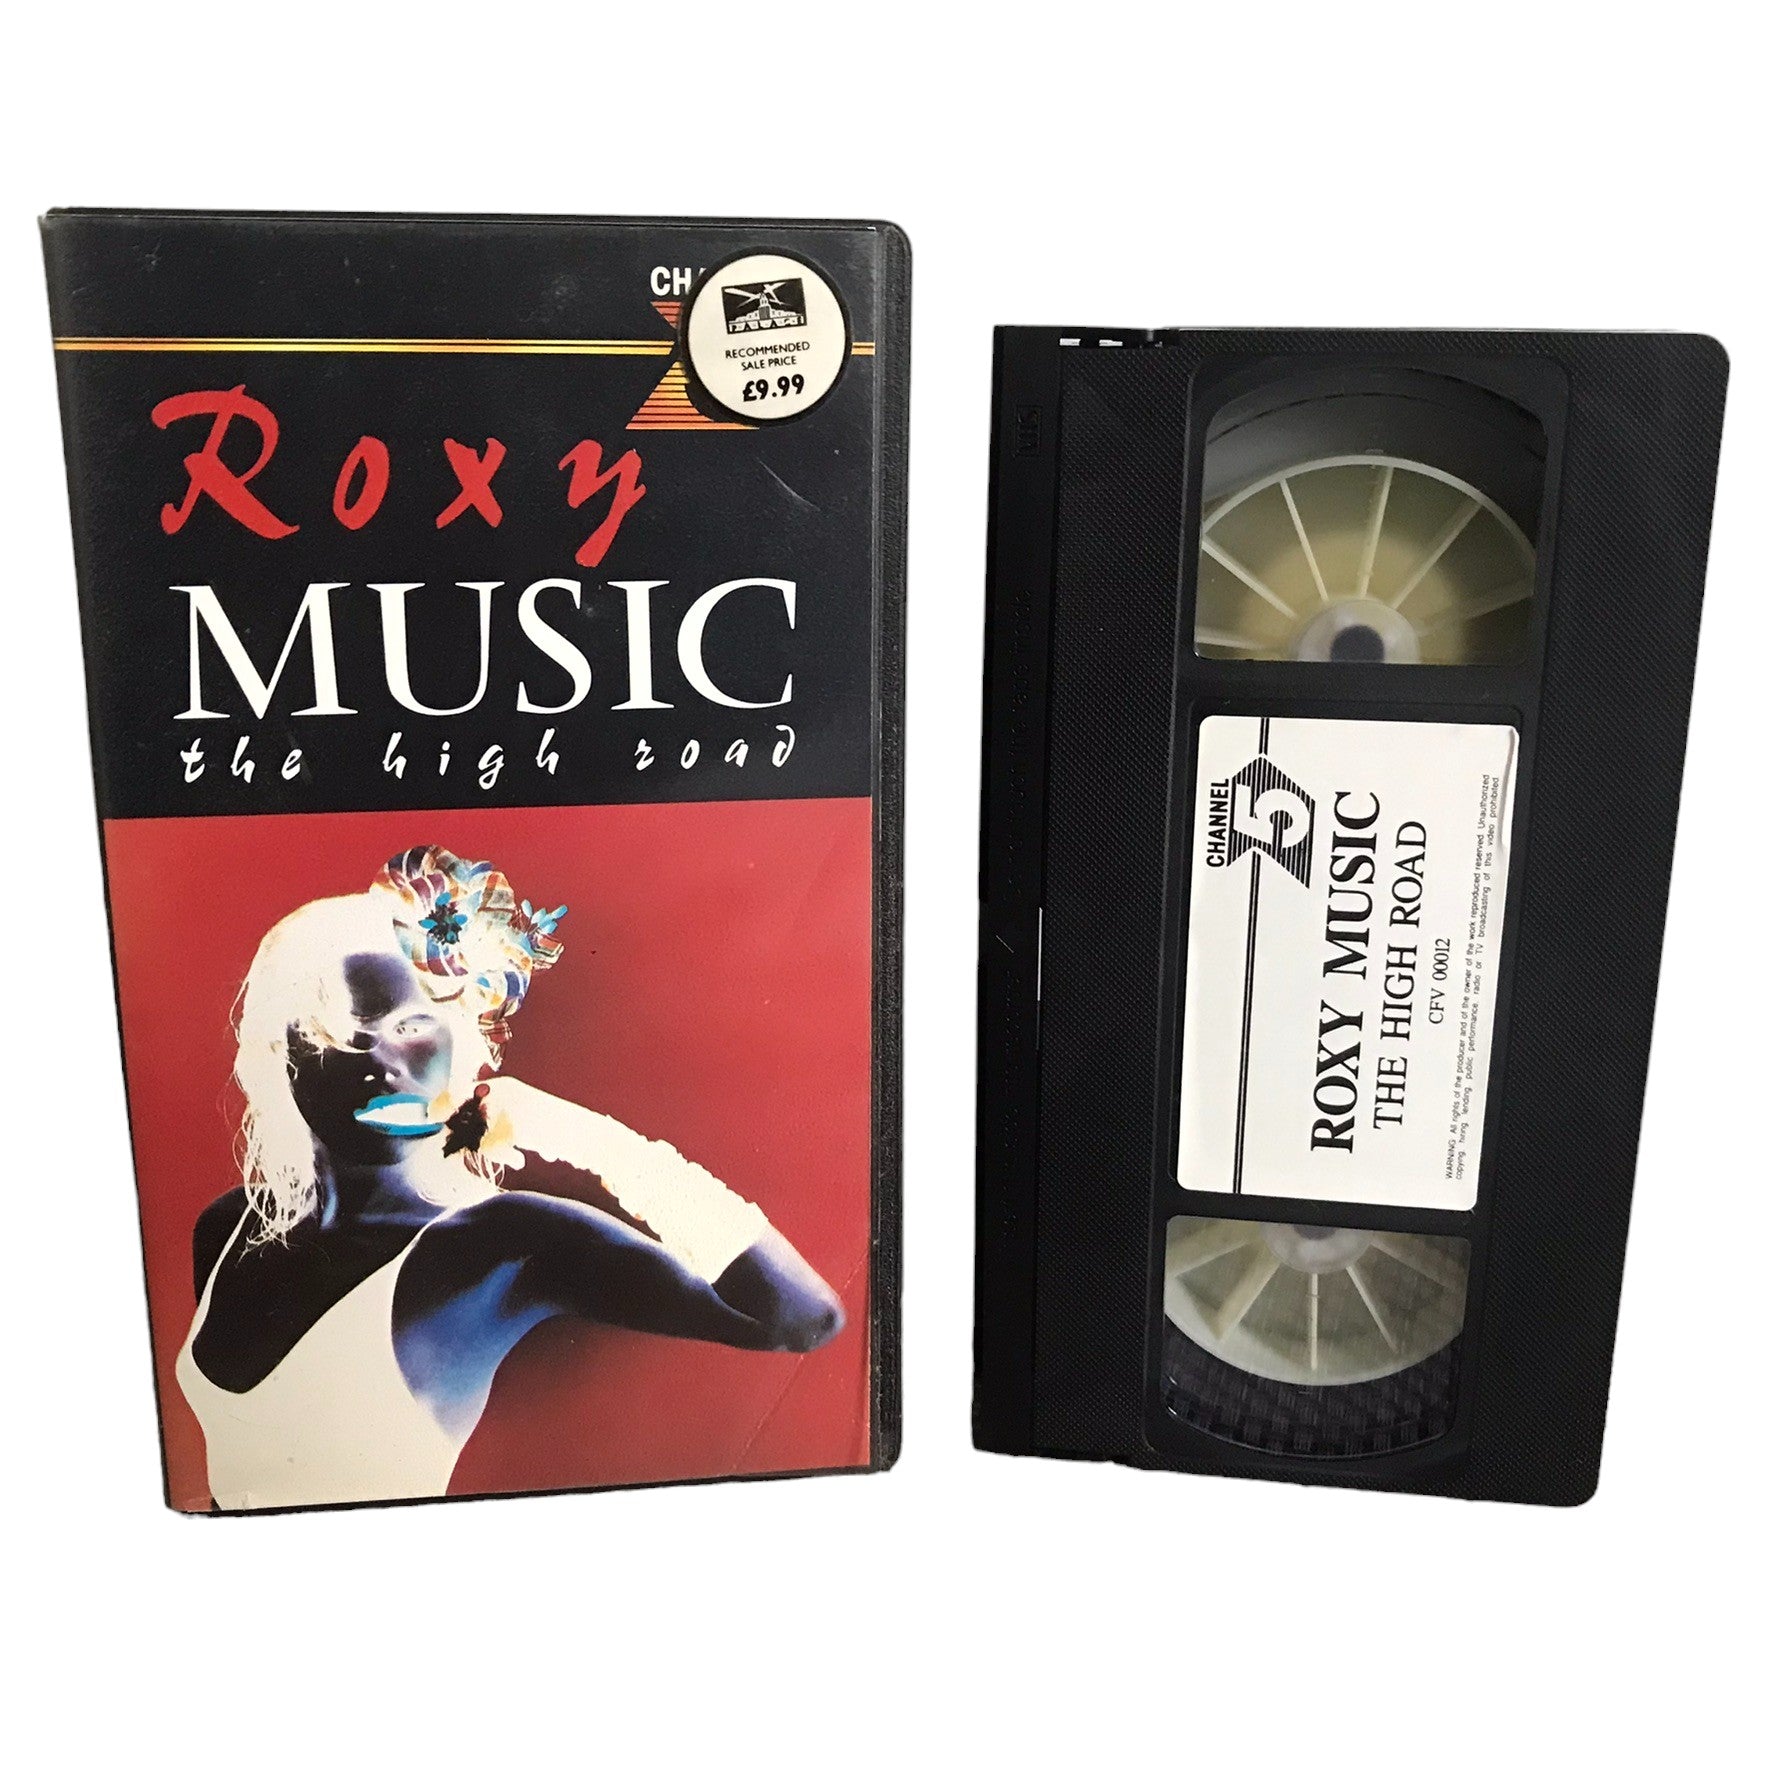 Roxy Music The High Road - Bryan Ferry - Channel 5 - Music - Pal - VHS-